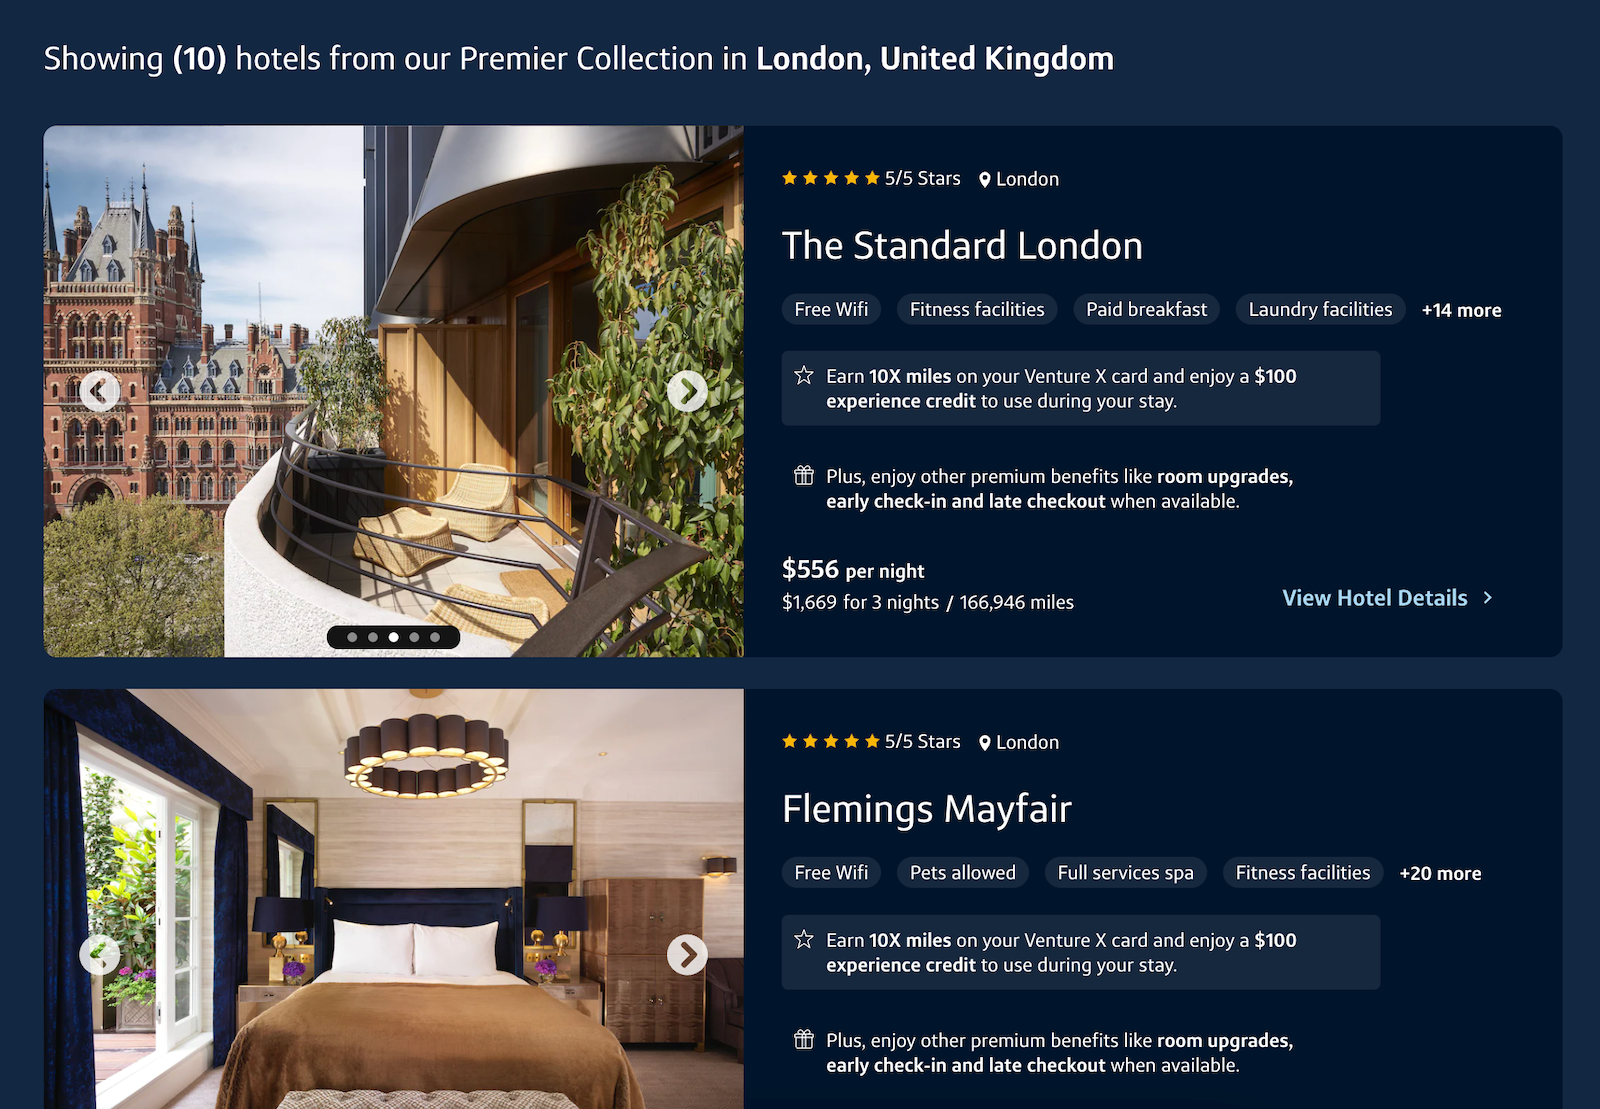 list of hotels in London in the Premier Collection